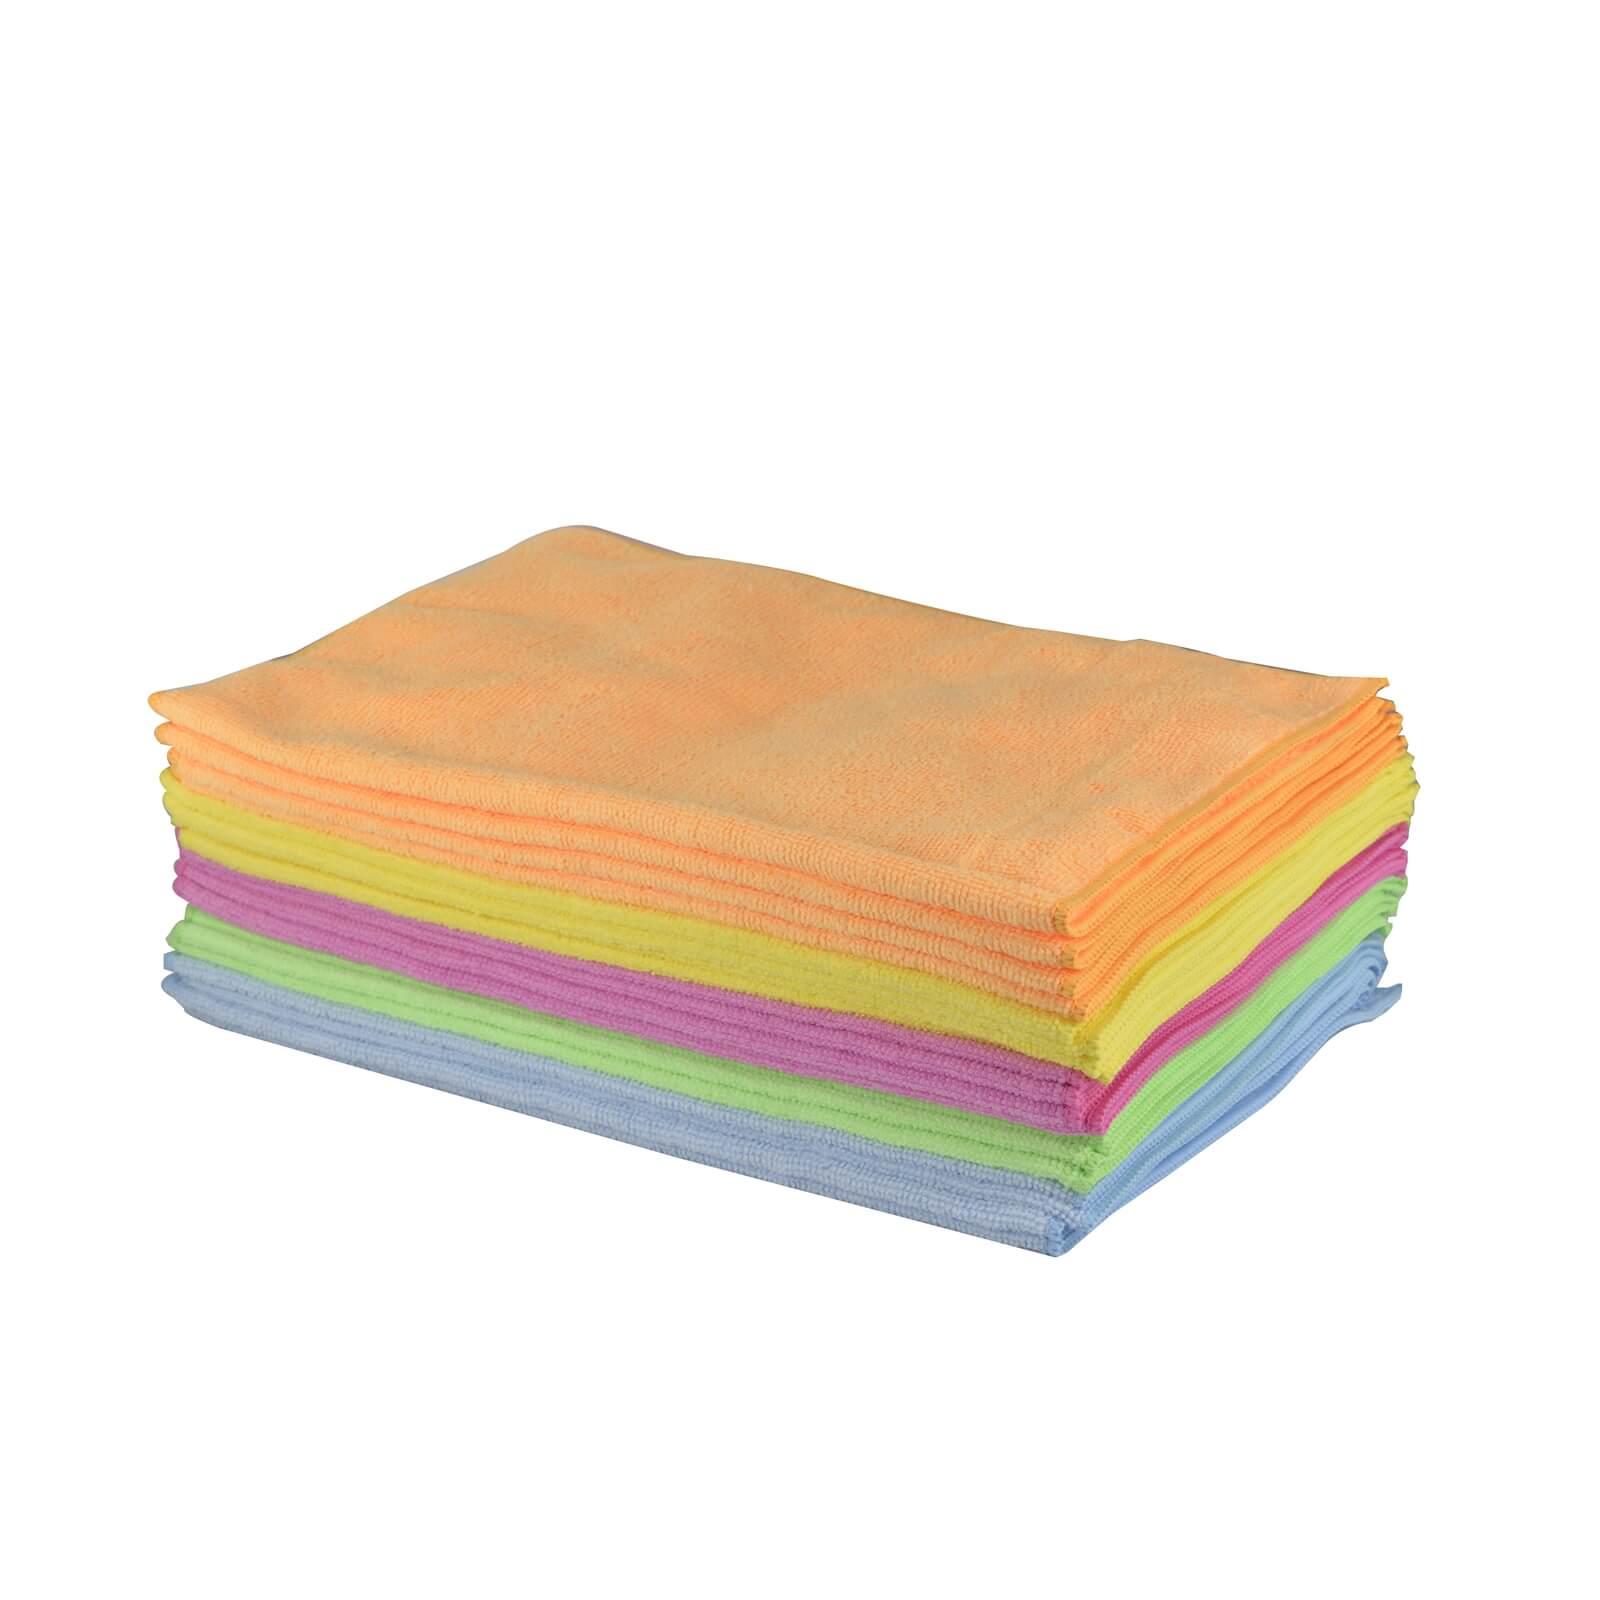 20 pack of Microfibre cloths